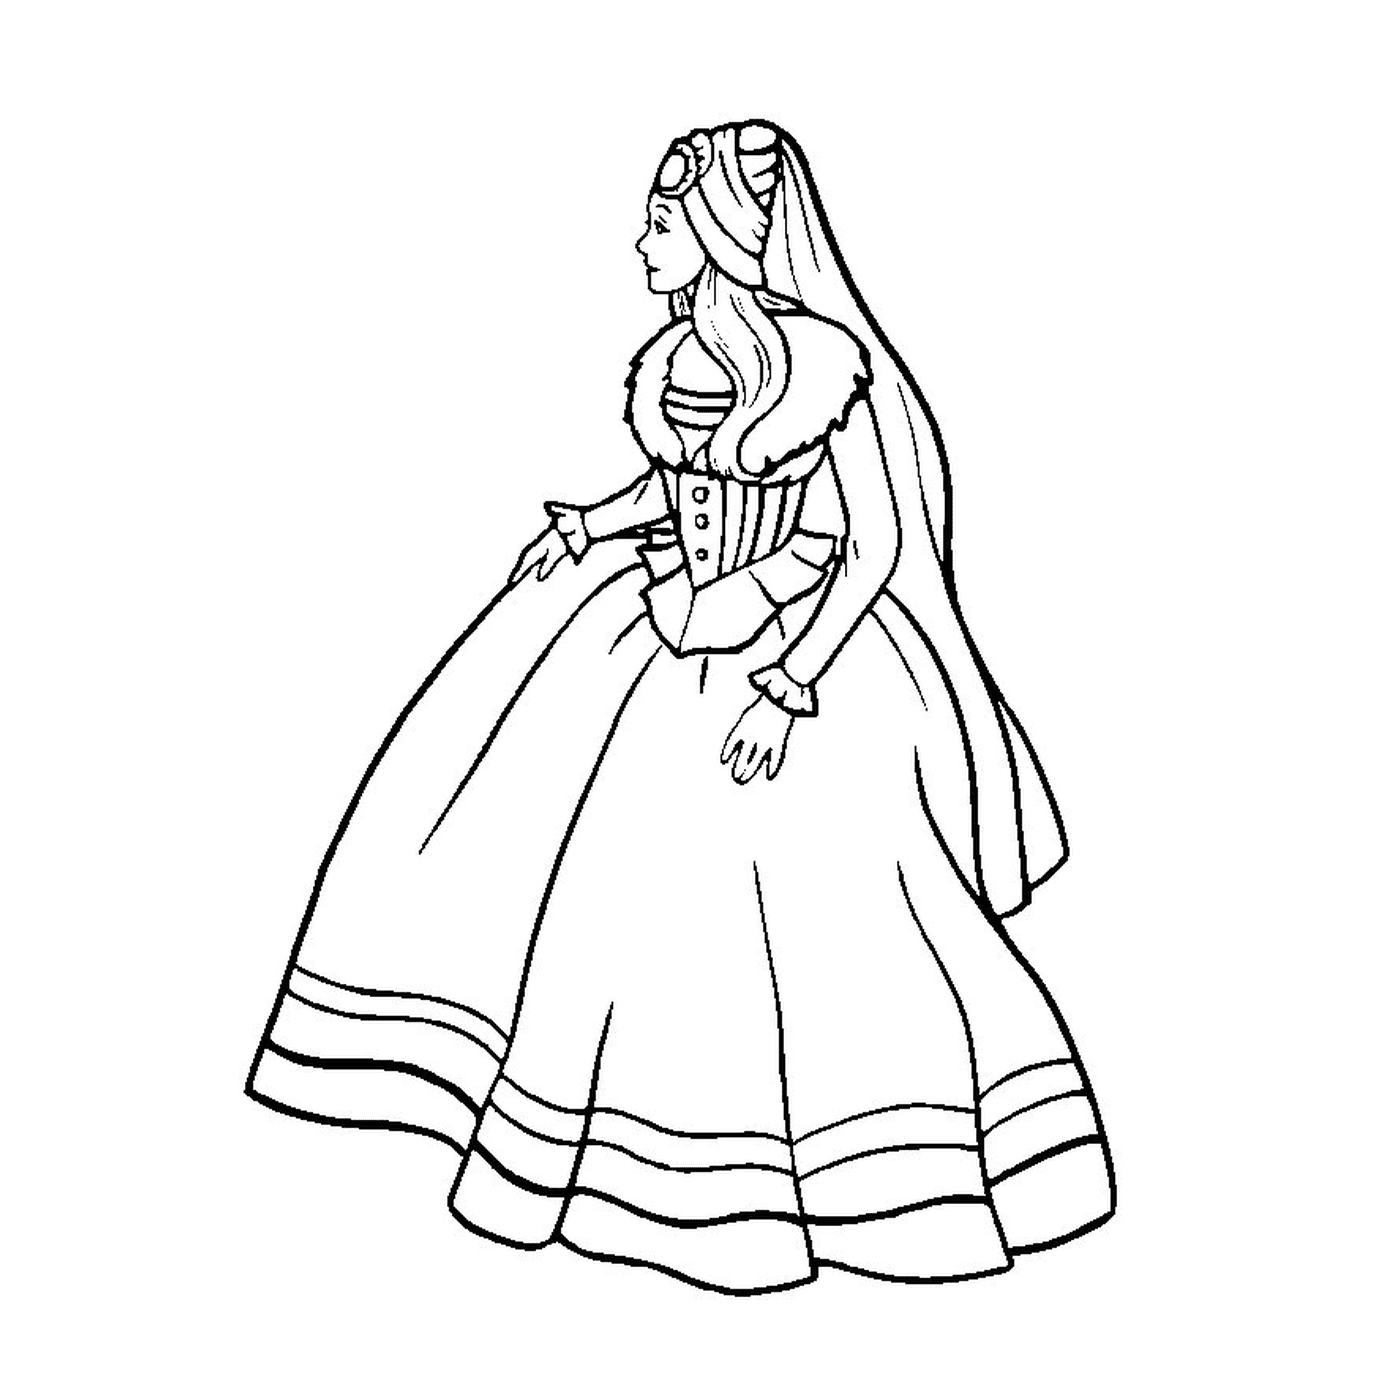  Barbie princess heart with a woman in dress 